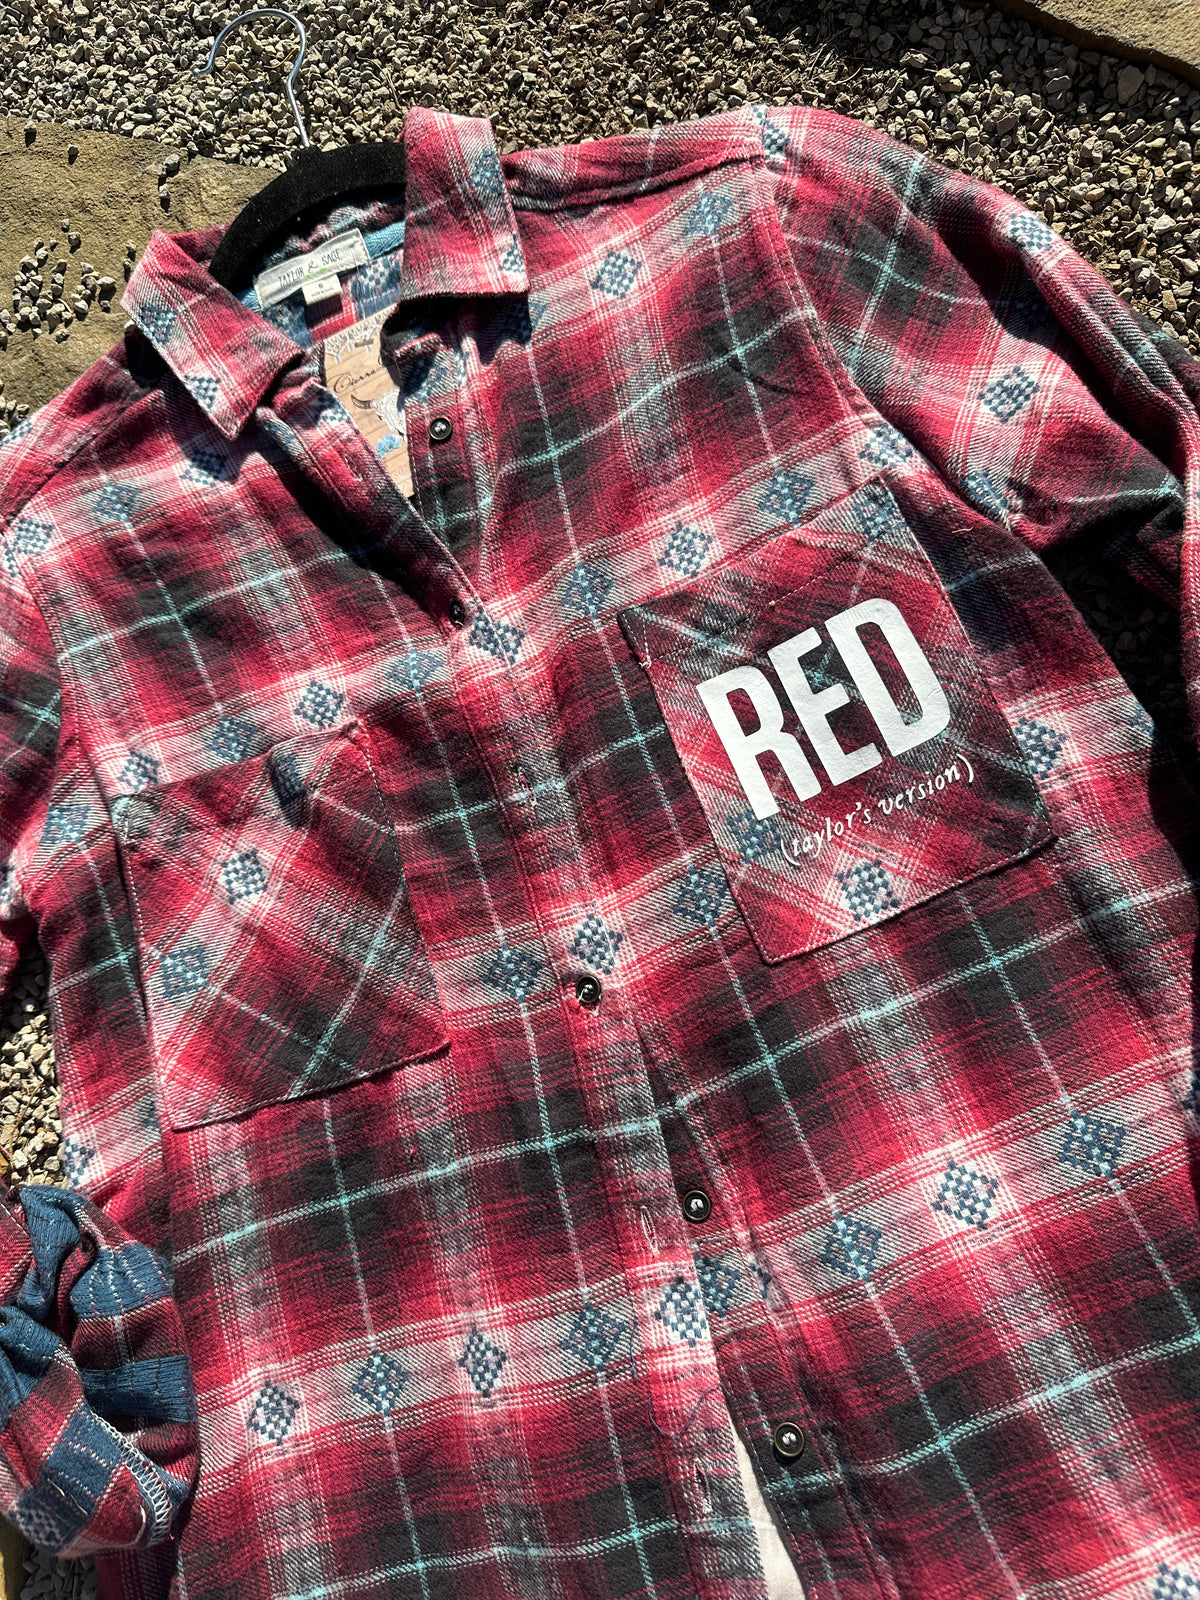 Red Print Mix Flannel - small